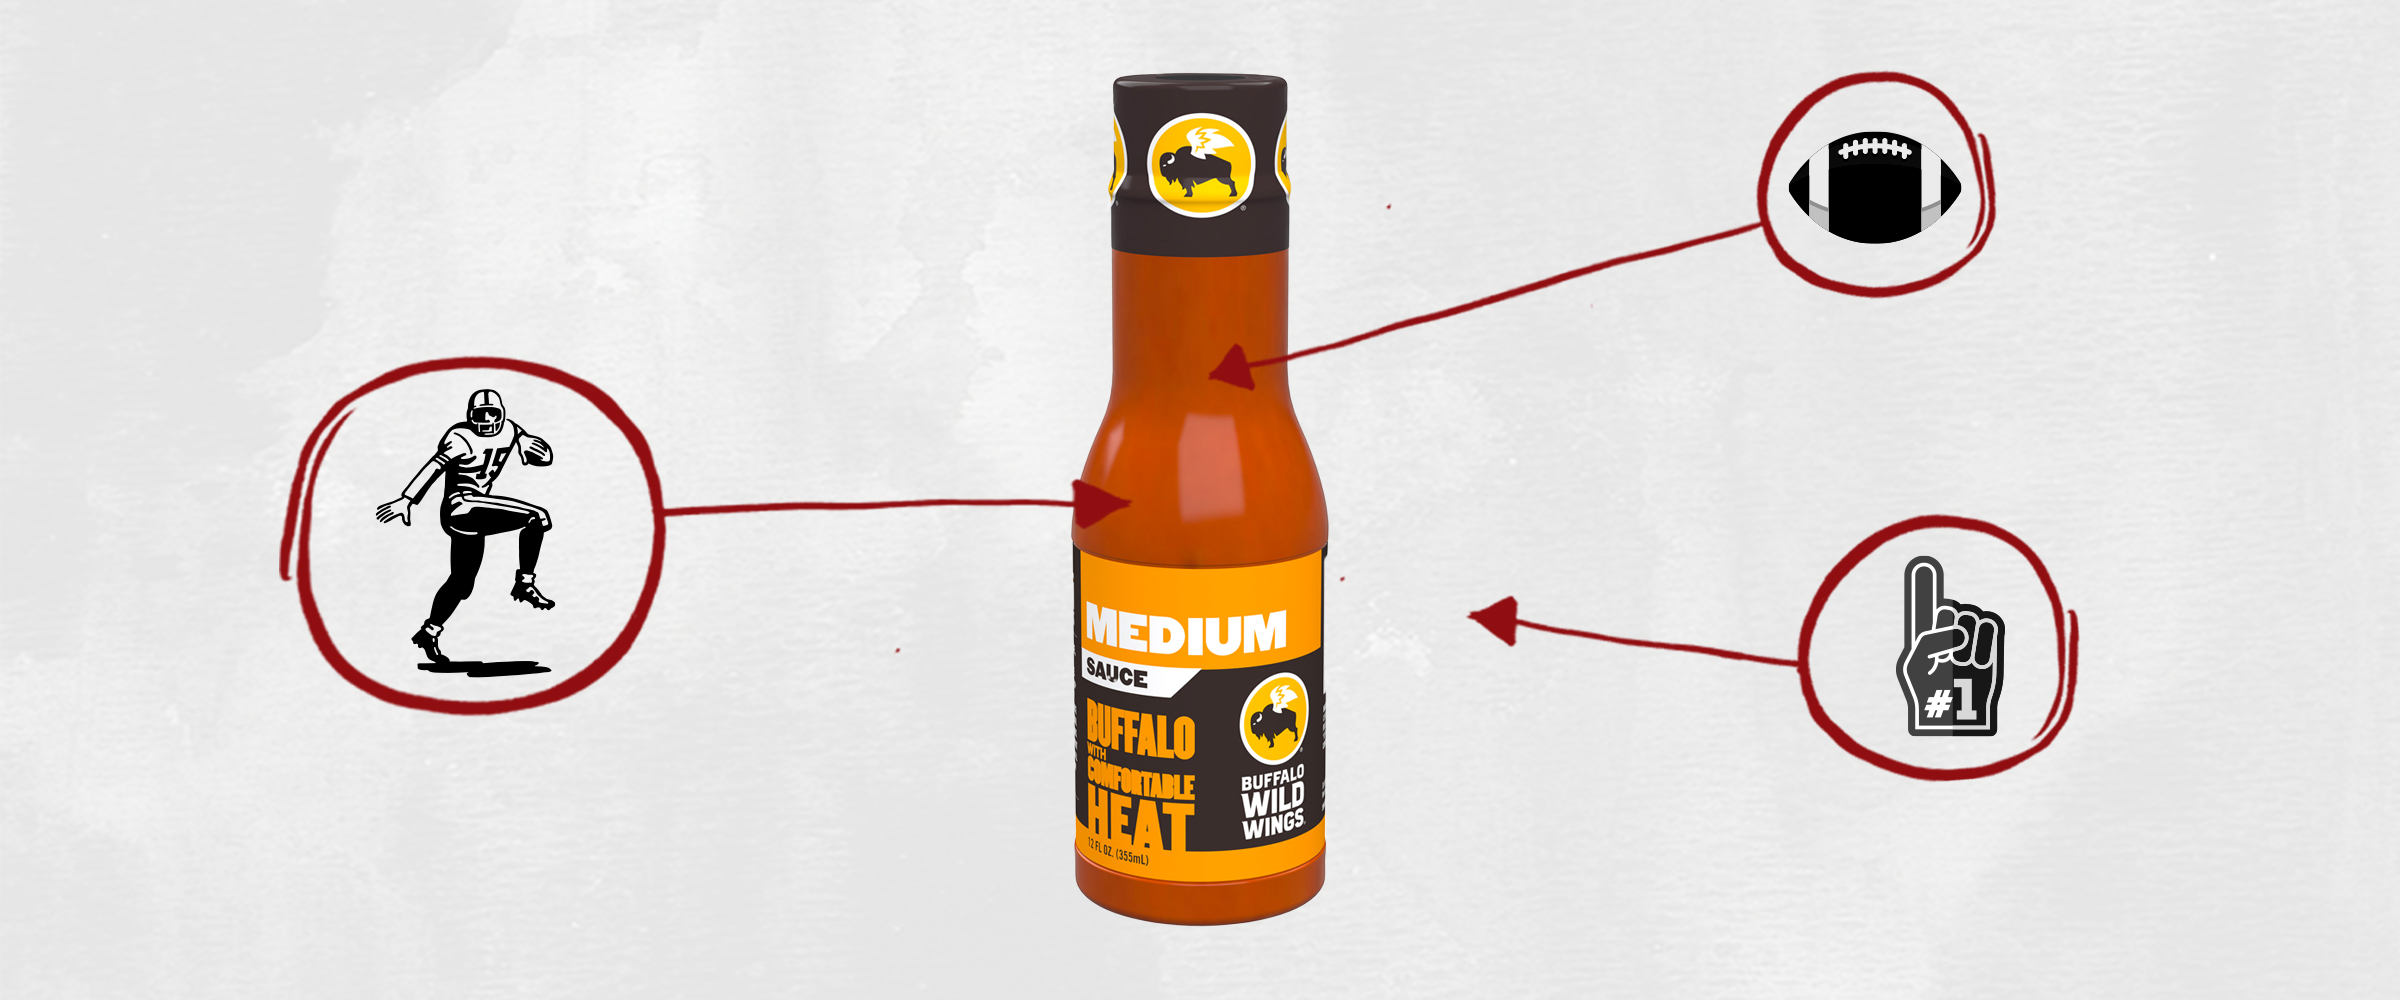 All the Ingredients in Buffalo Wild Wings Medium Sauce Explained image pic picture